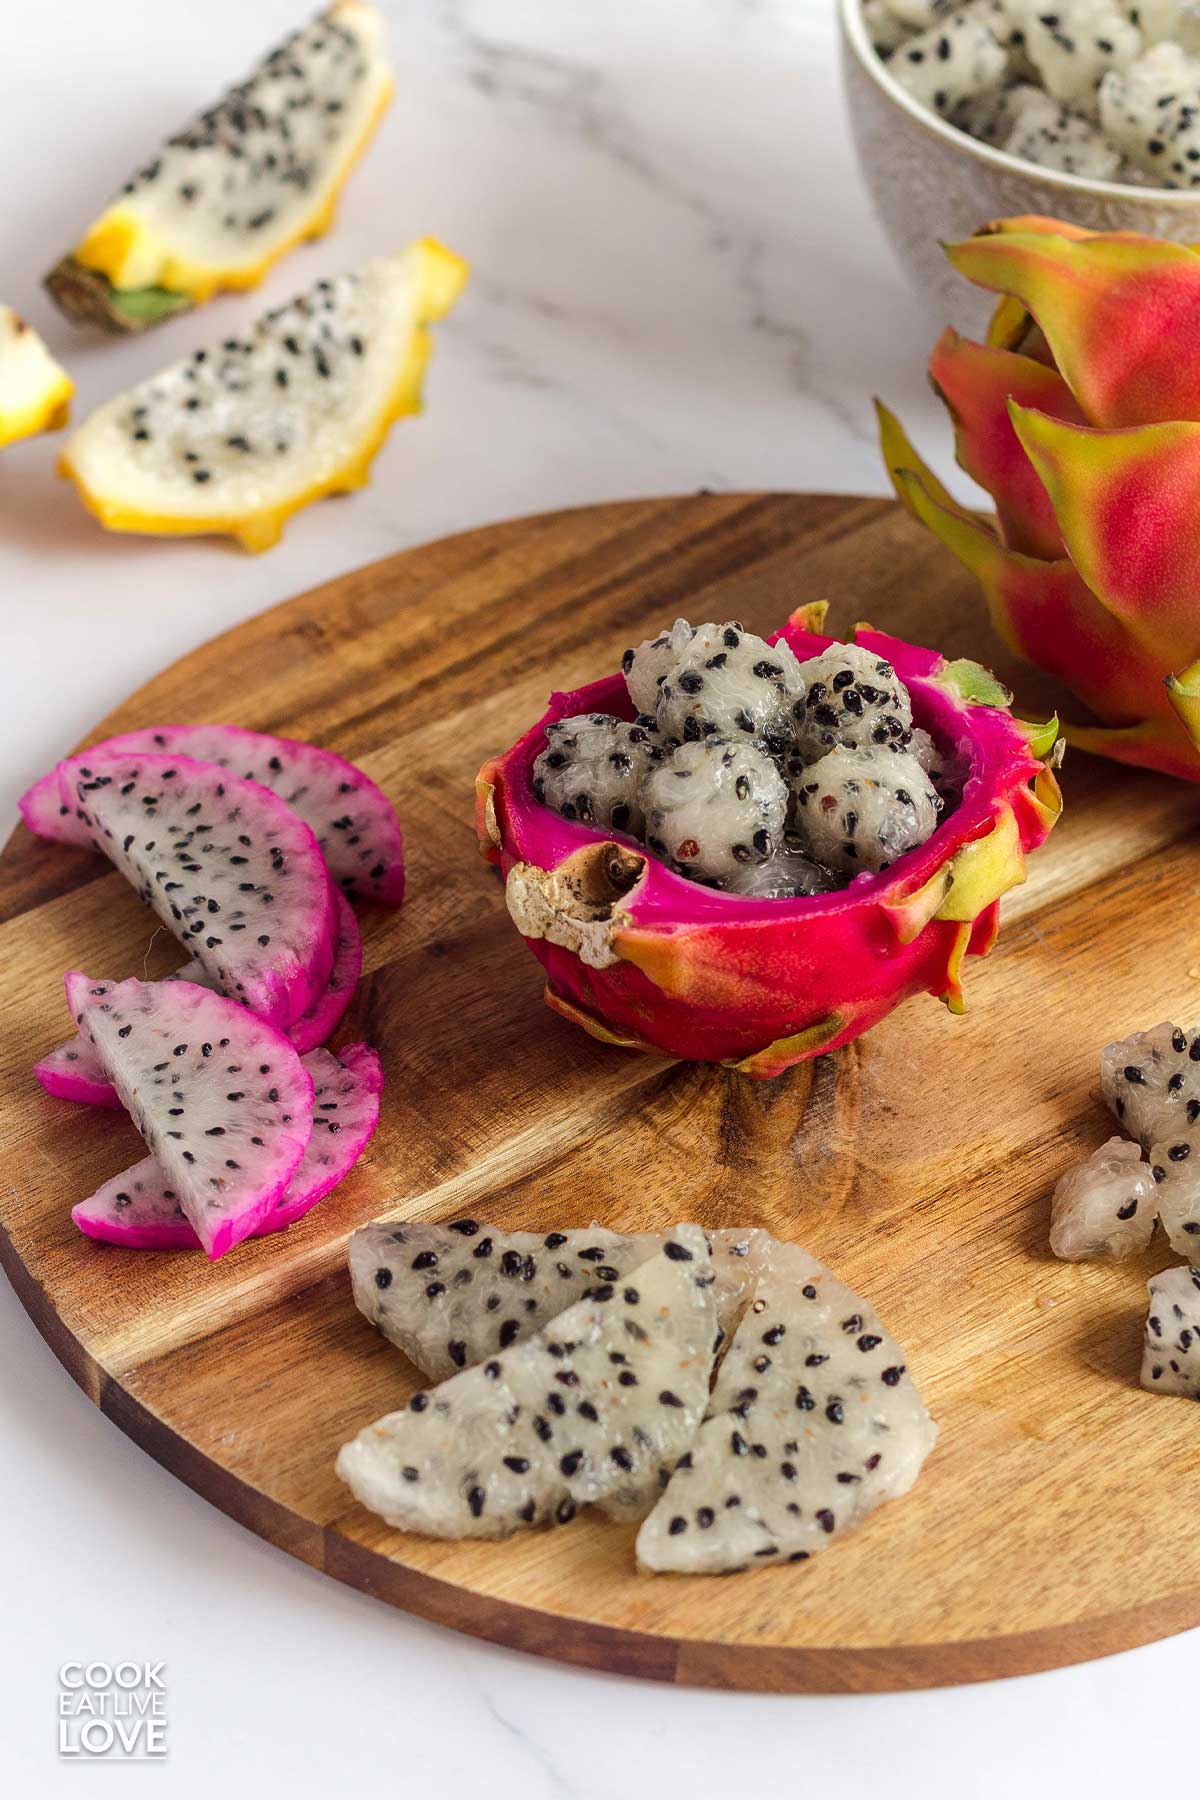 Balls scooped and served in the peel of dragon fruit with slices and cubes around it.